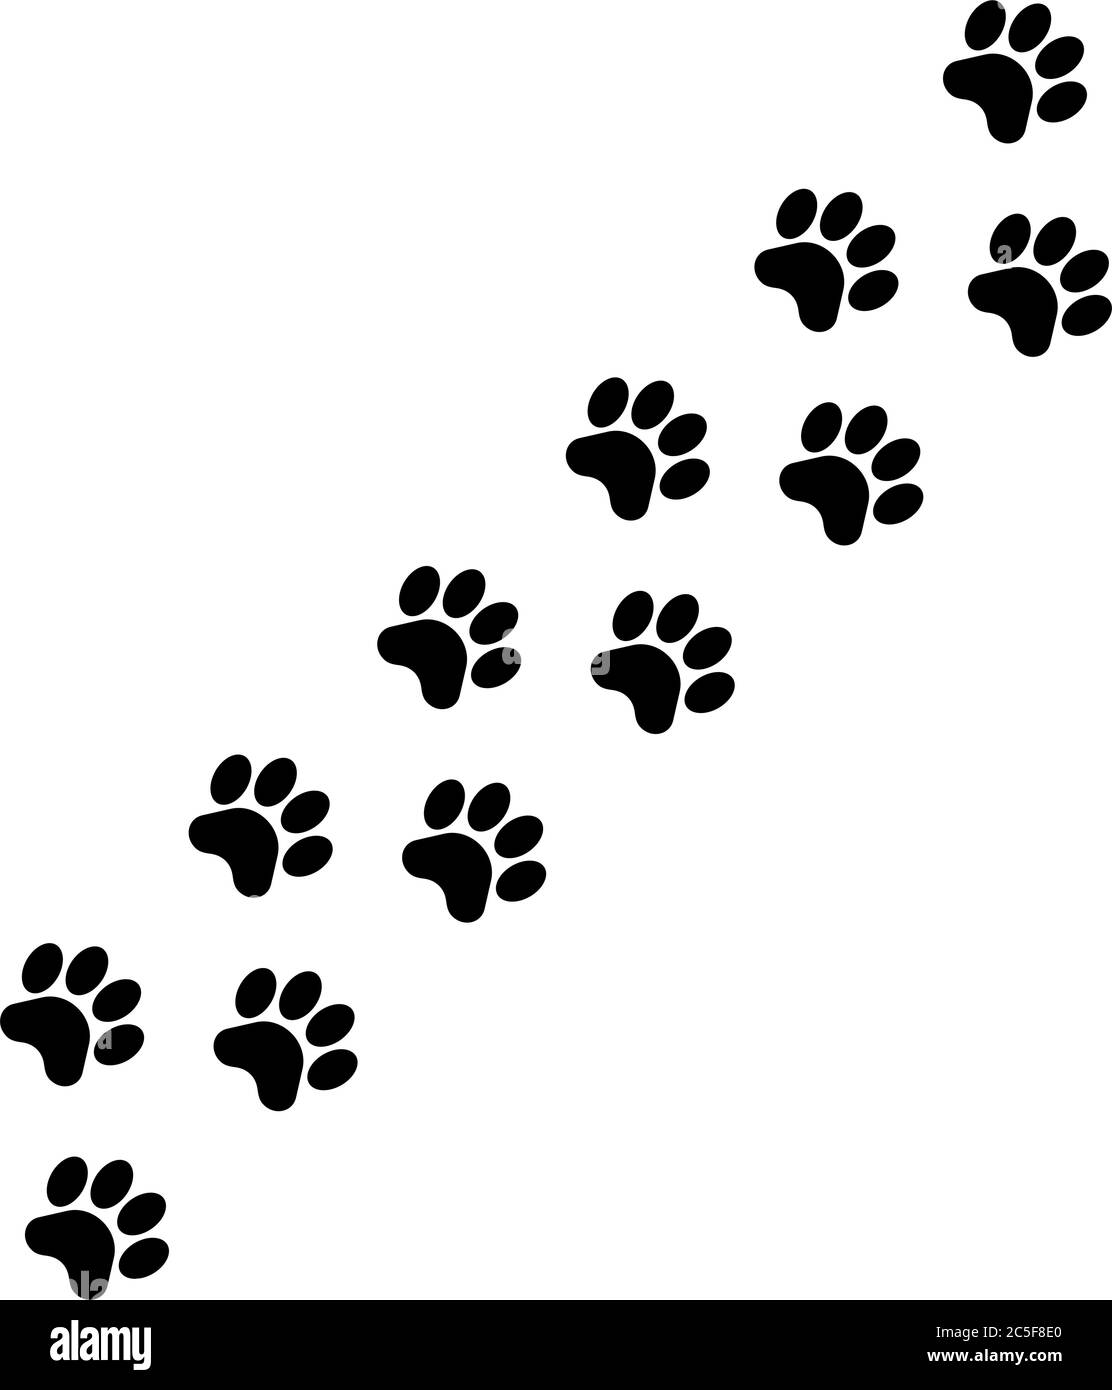 Black silhouette of a animal paw print isolated pet or wildlife footprints traces illustration Stock Vector